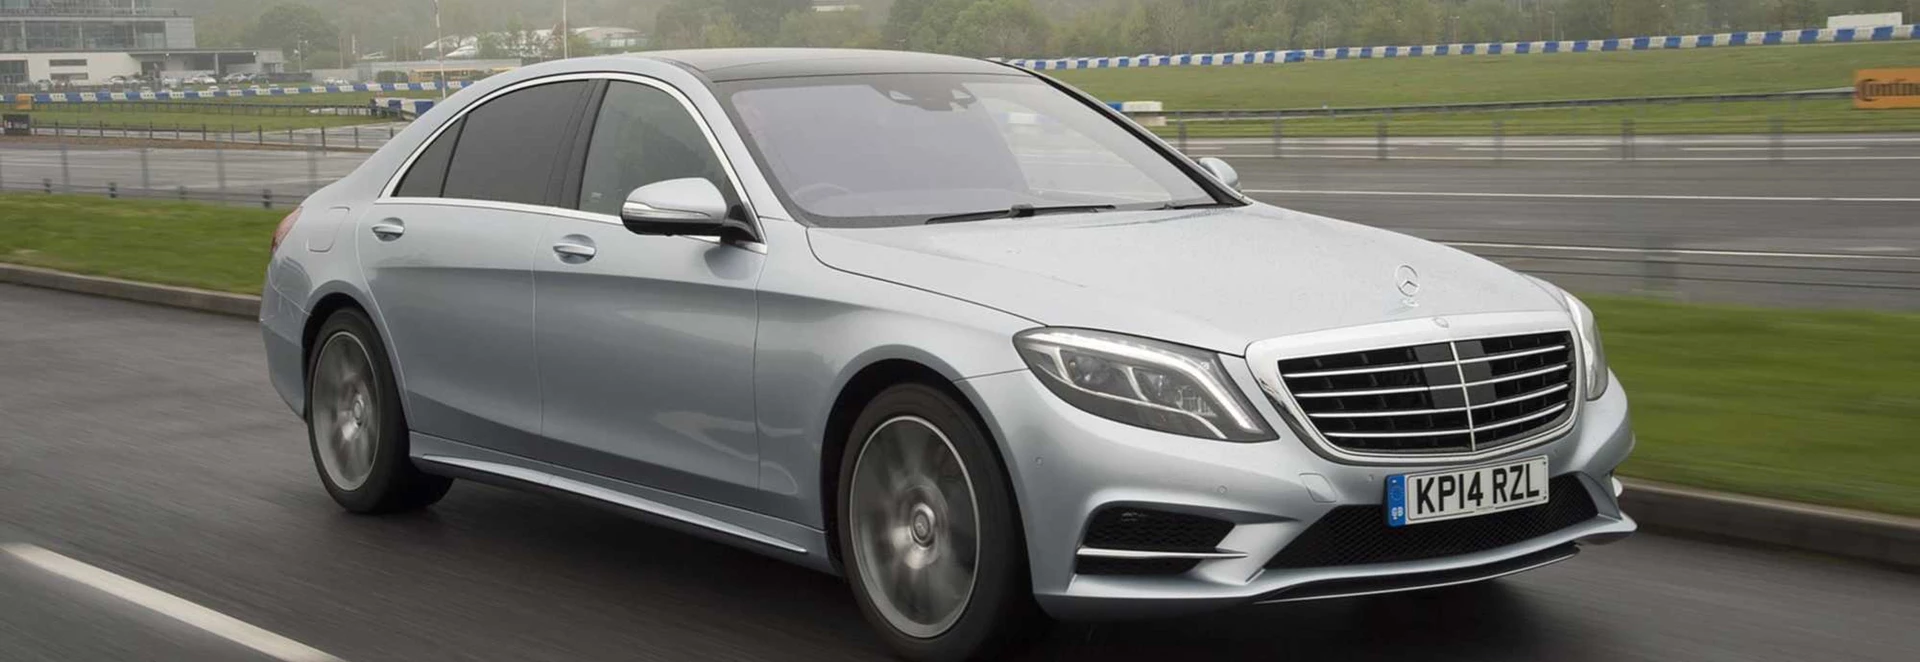 Mercedes S-Class saloon review 